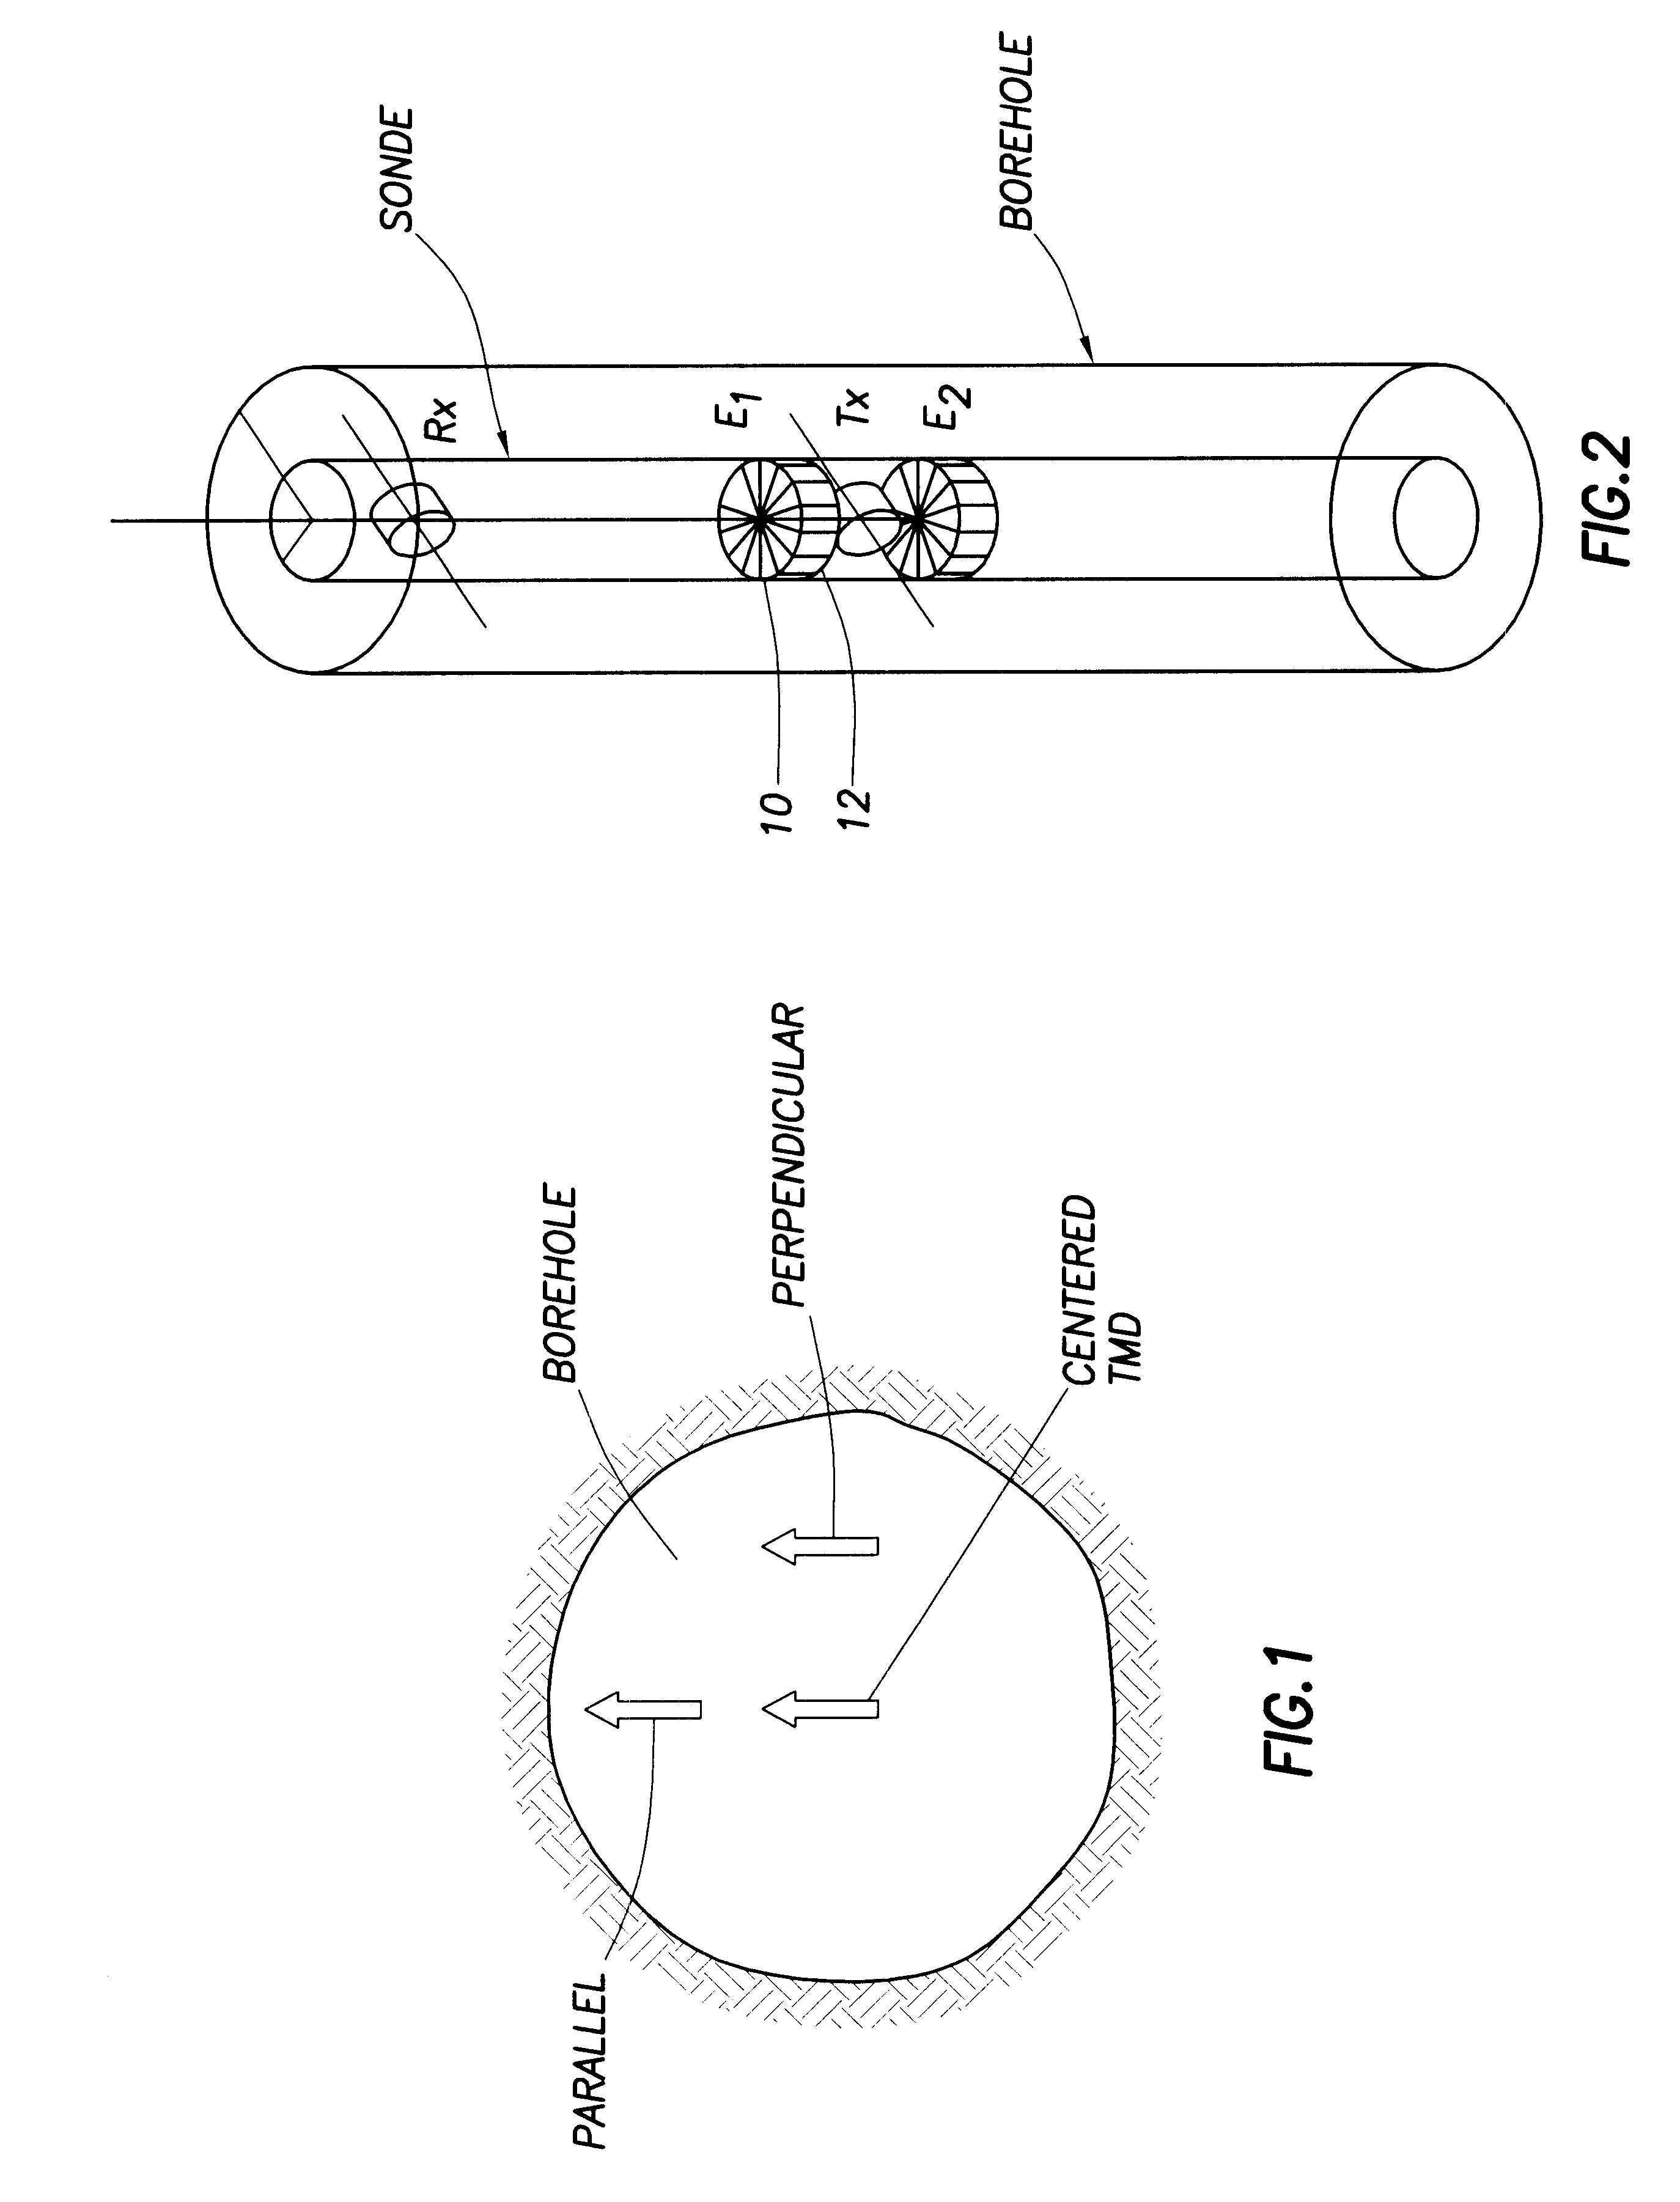 Method and apparatus for cancellation of borehole effects due to a tilted or transverse magnetic dipole